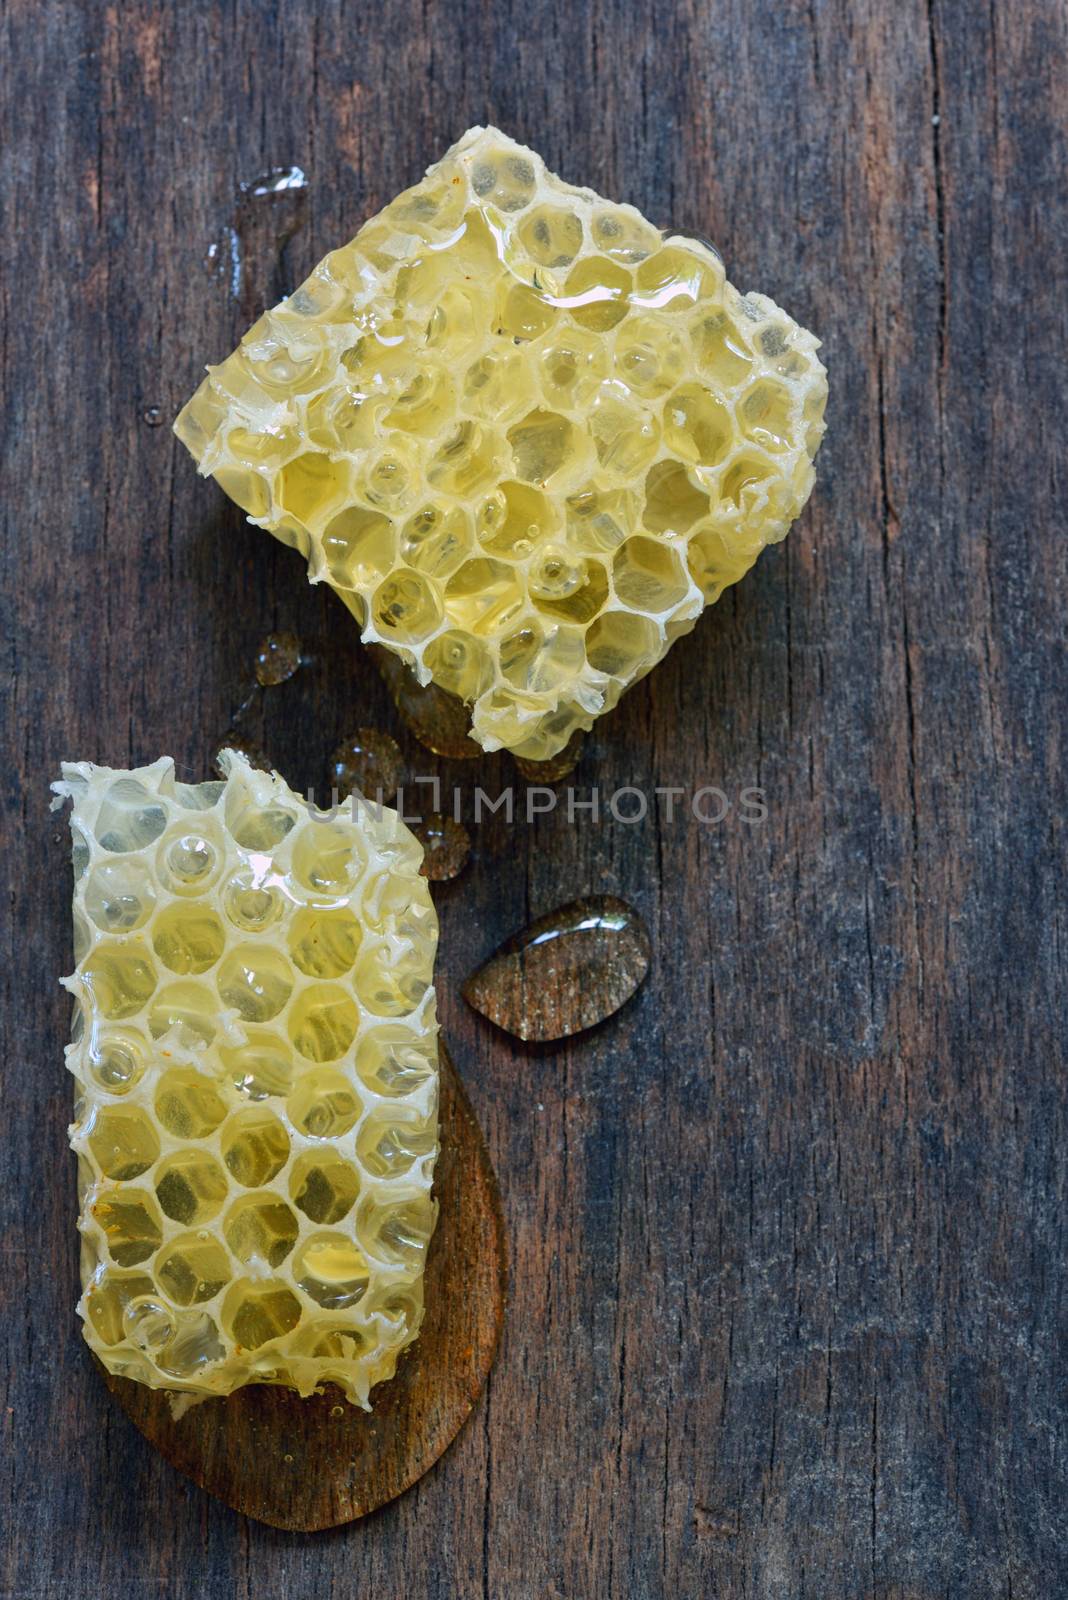 Honeycomb on a vintage wooden background